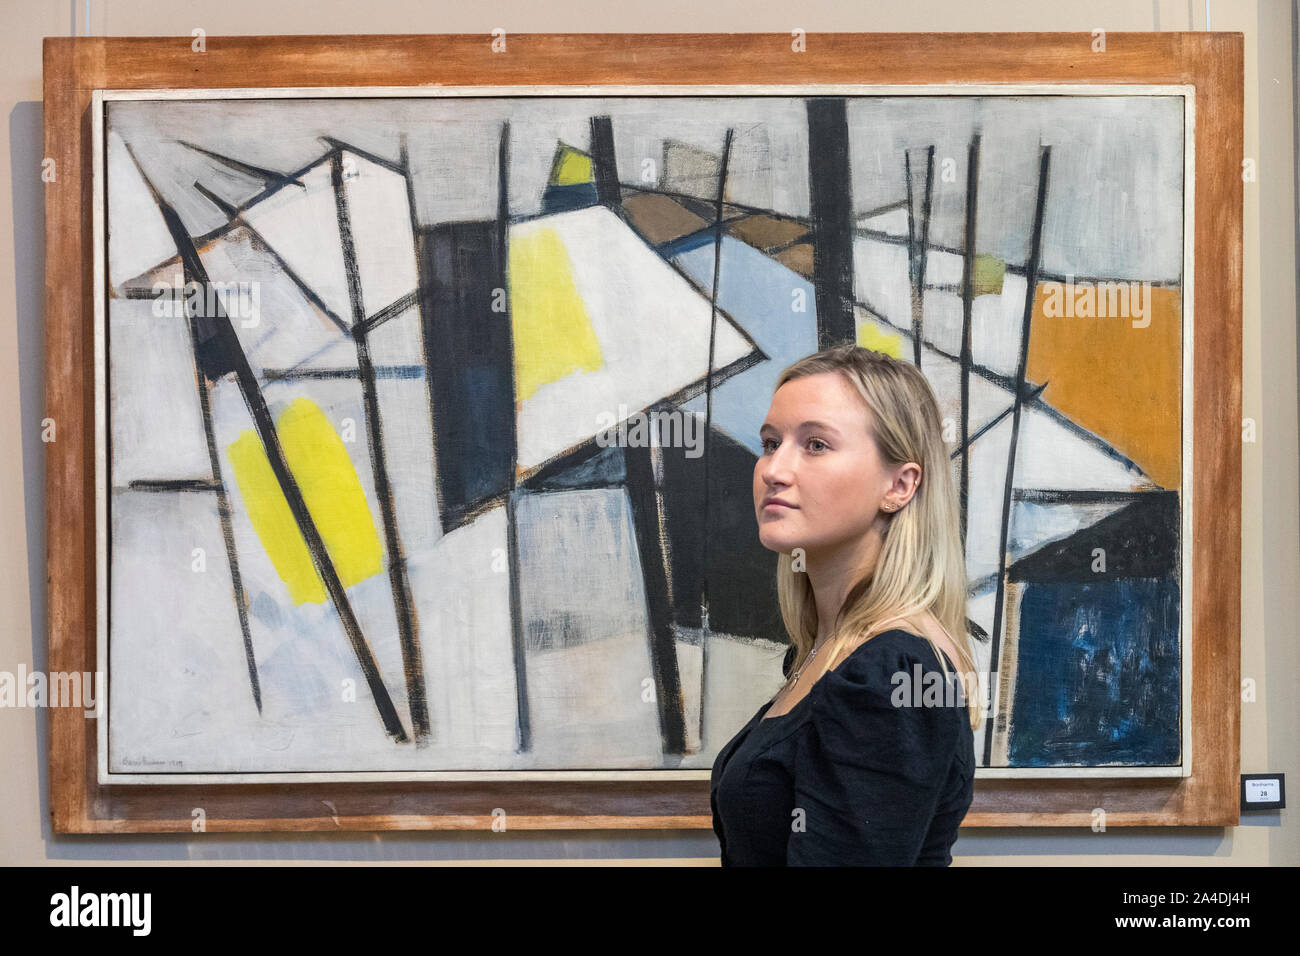 Edinburgh, United Kingdom. 14th Oct, 2019. Pictured: Black, White and Yellow by Wilhelmina Barbs-Graham which will be included in the Bonhams Scottish Art Sale. Royan Harbour, a newly discovered painting by the Scottish colourist painter Samuel Peploe, leads the items in Bonhams next Scottish Art Sale. Royan Harbour, which is estimated at £70,000-100,000, was first owned by Mme Marie Marguerite Soulie, who was married to the English novelist and playwright Arnold Bennett from 1917-1921. Its whereabouts have been unknown to scholars until now. Credit: Rich Dyson/Alamy Live News Stock Photo